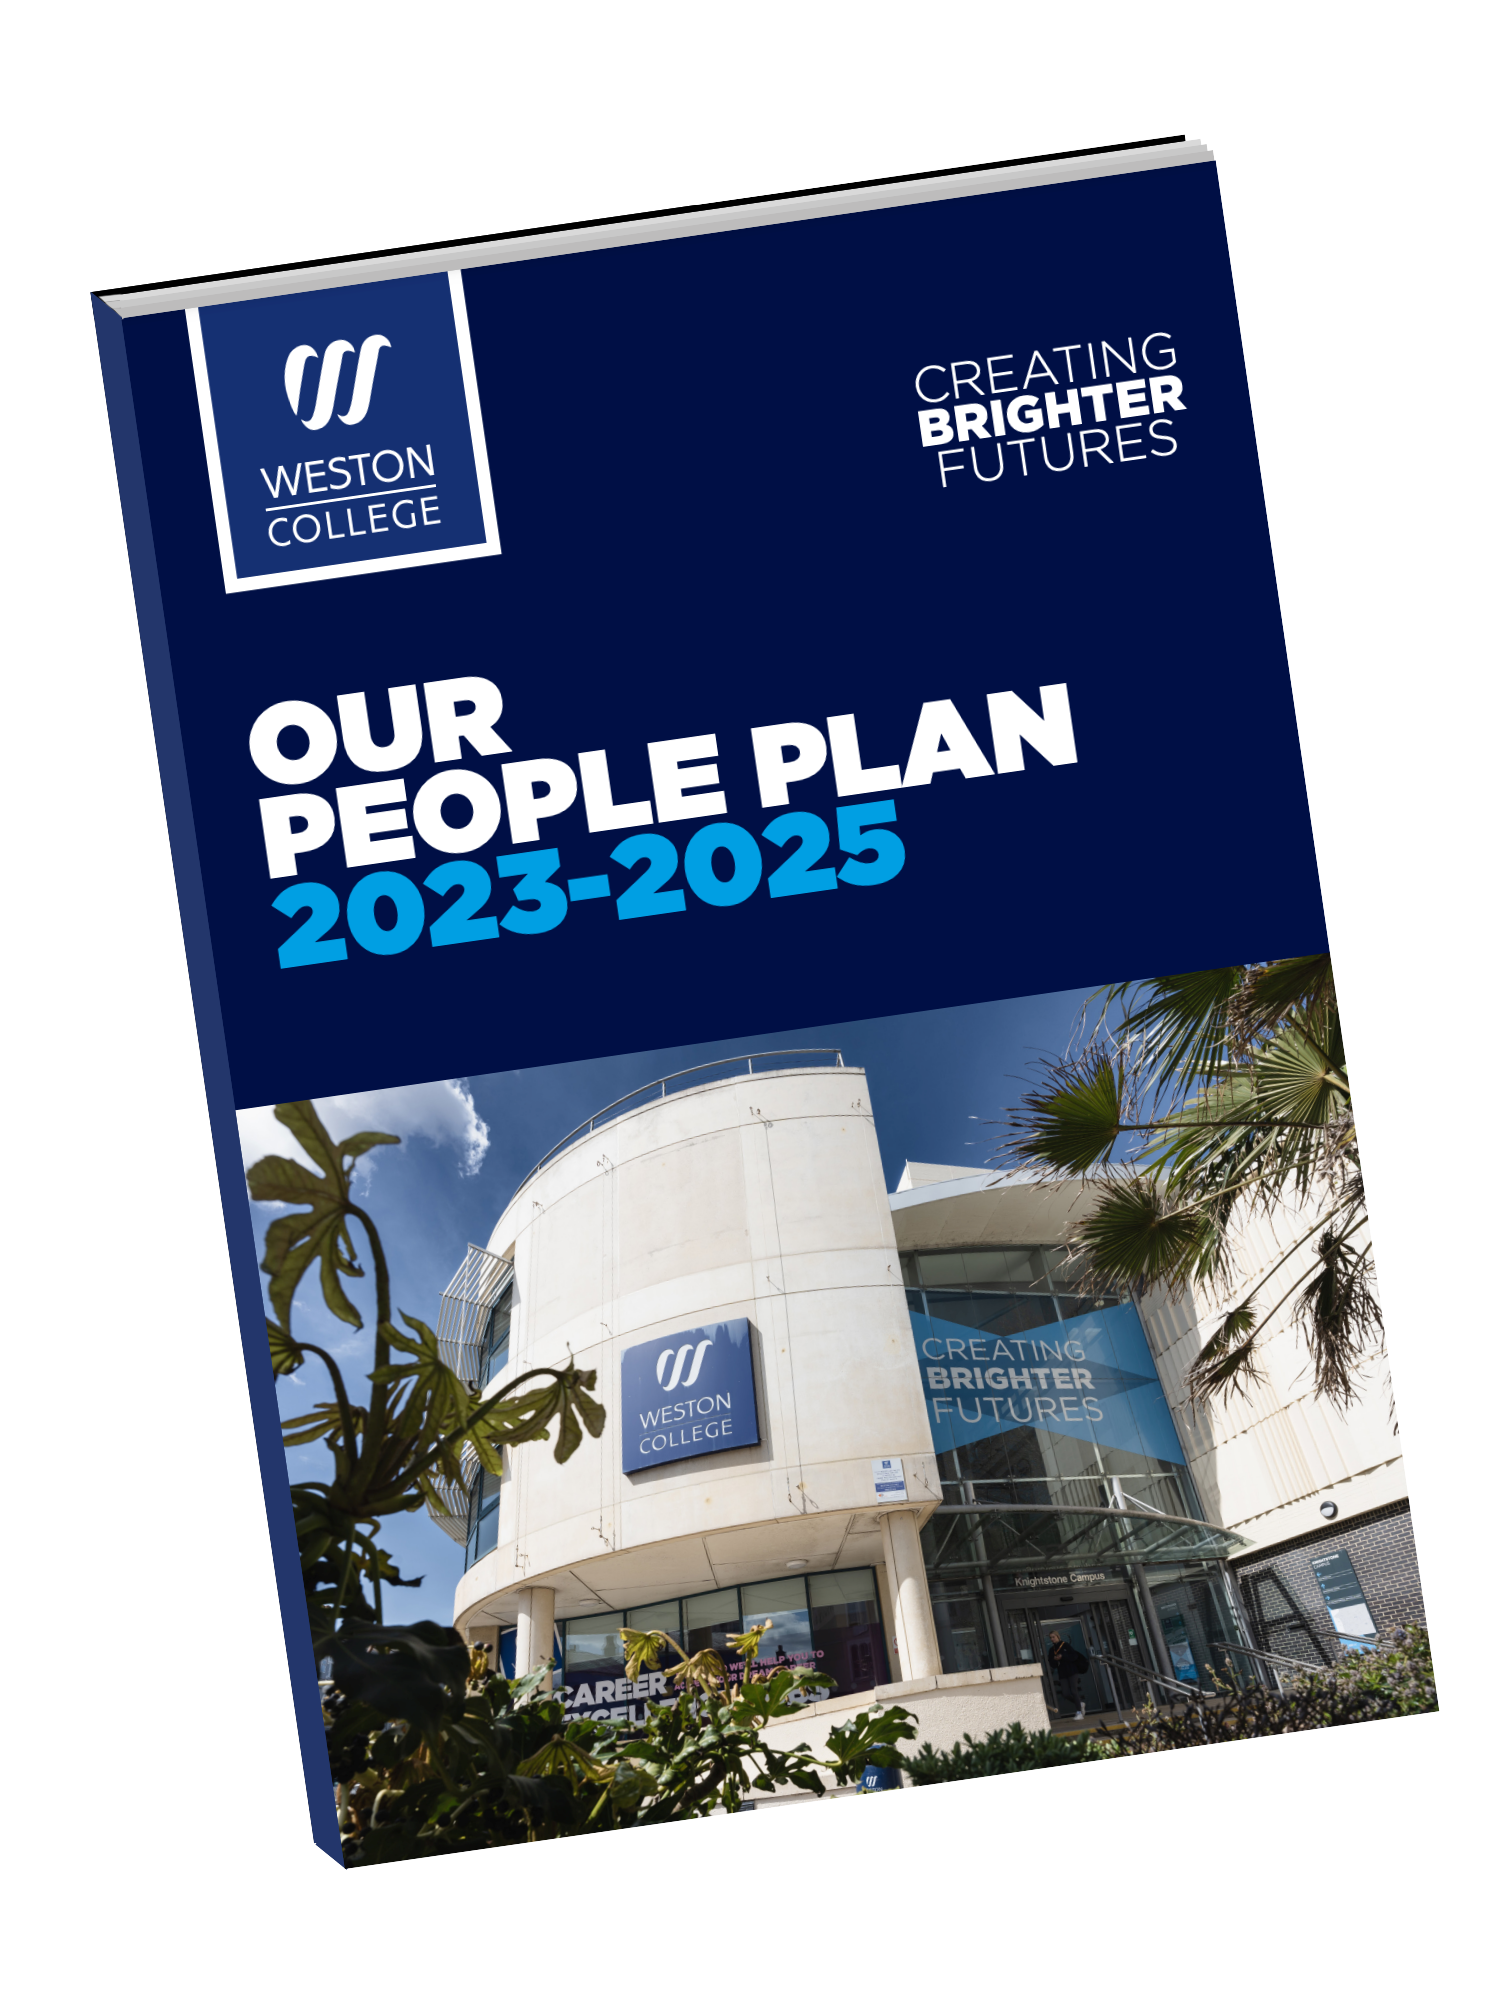 Our people plan 2023-2025